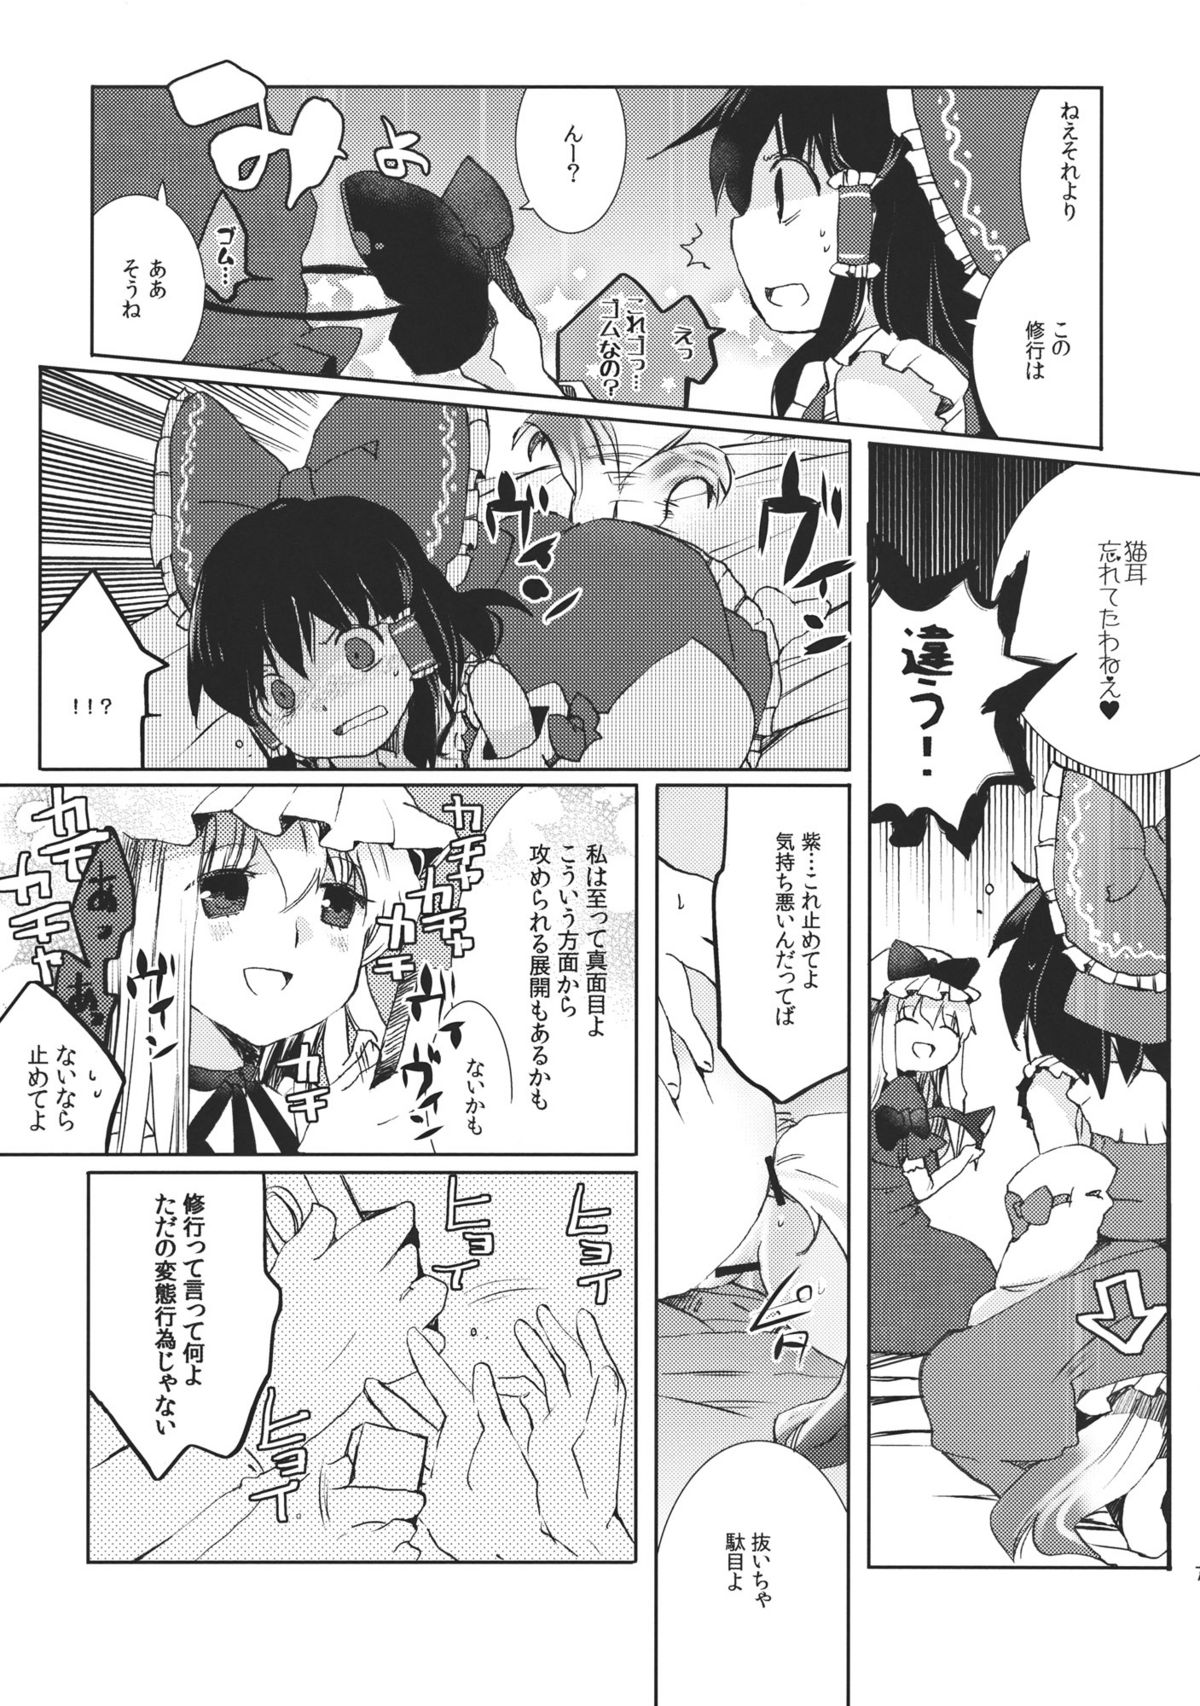 (C80) [Oimoto] Renbo Marking (Touhou Project) page 7 full